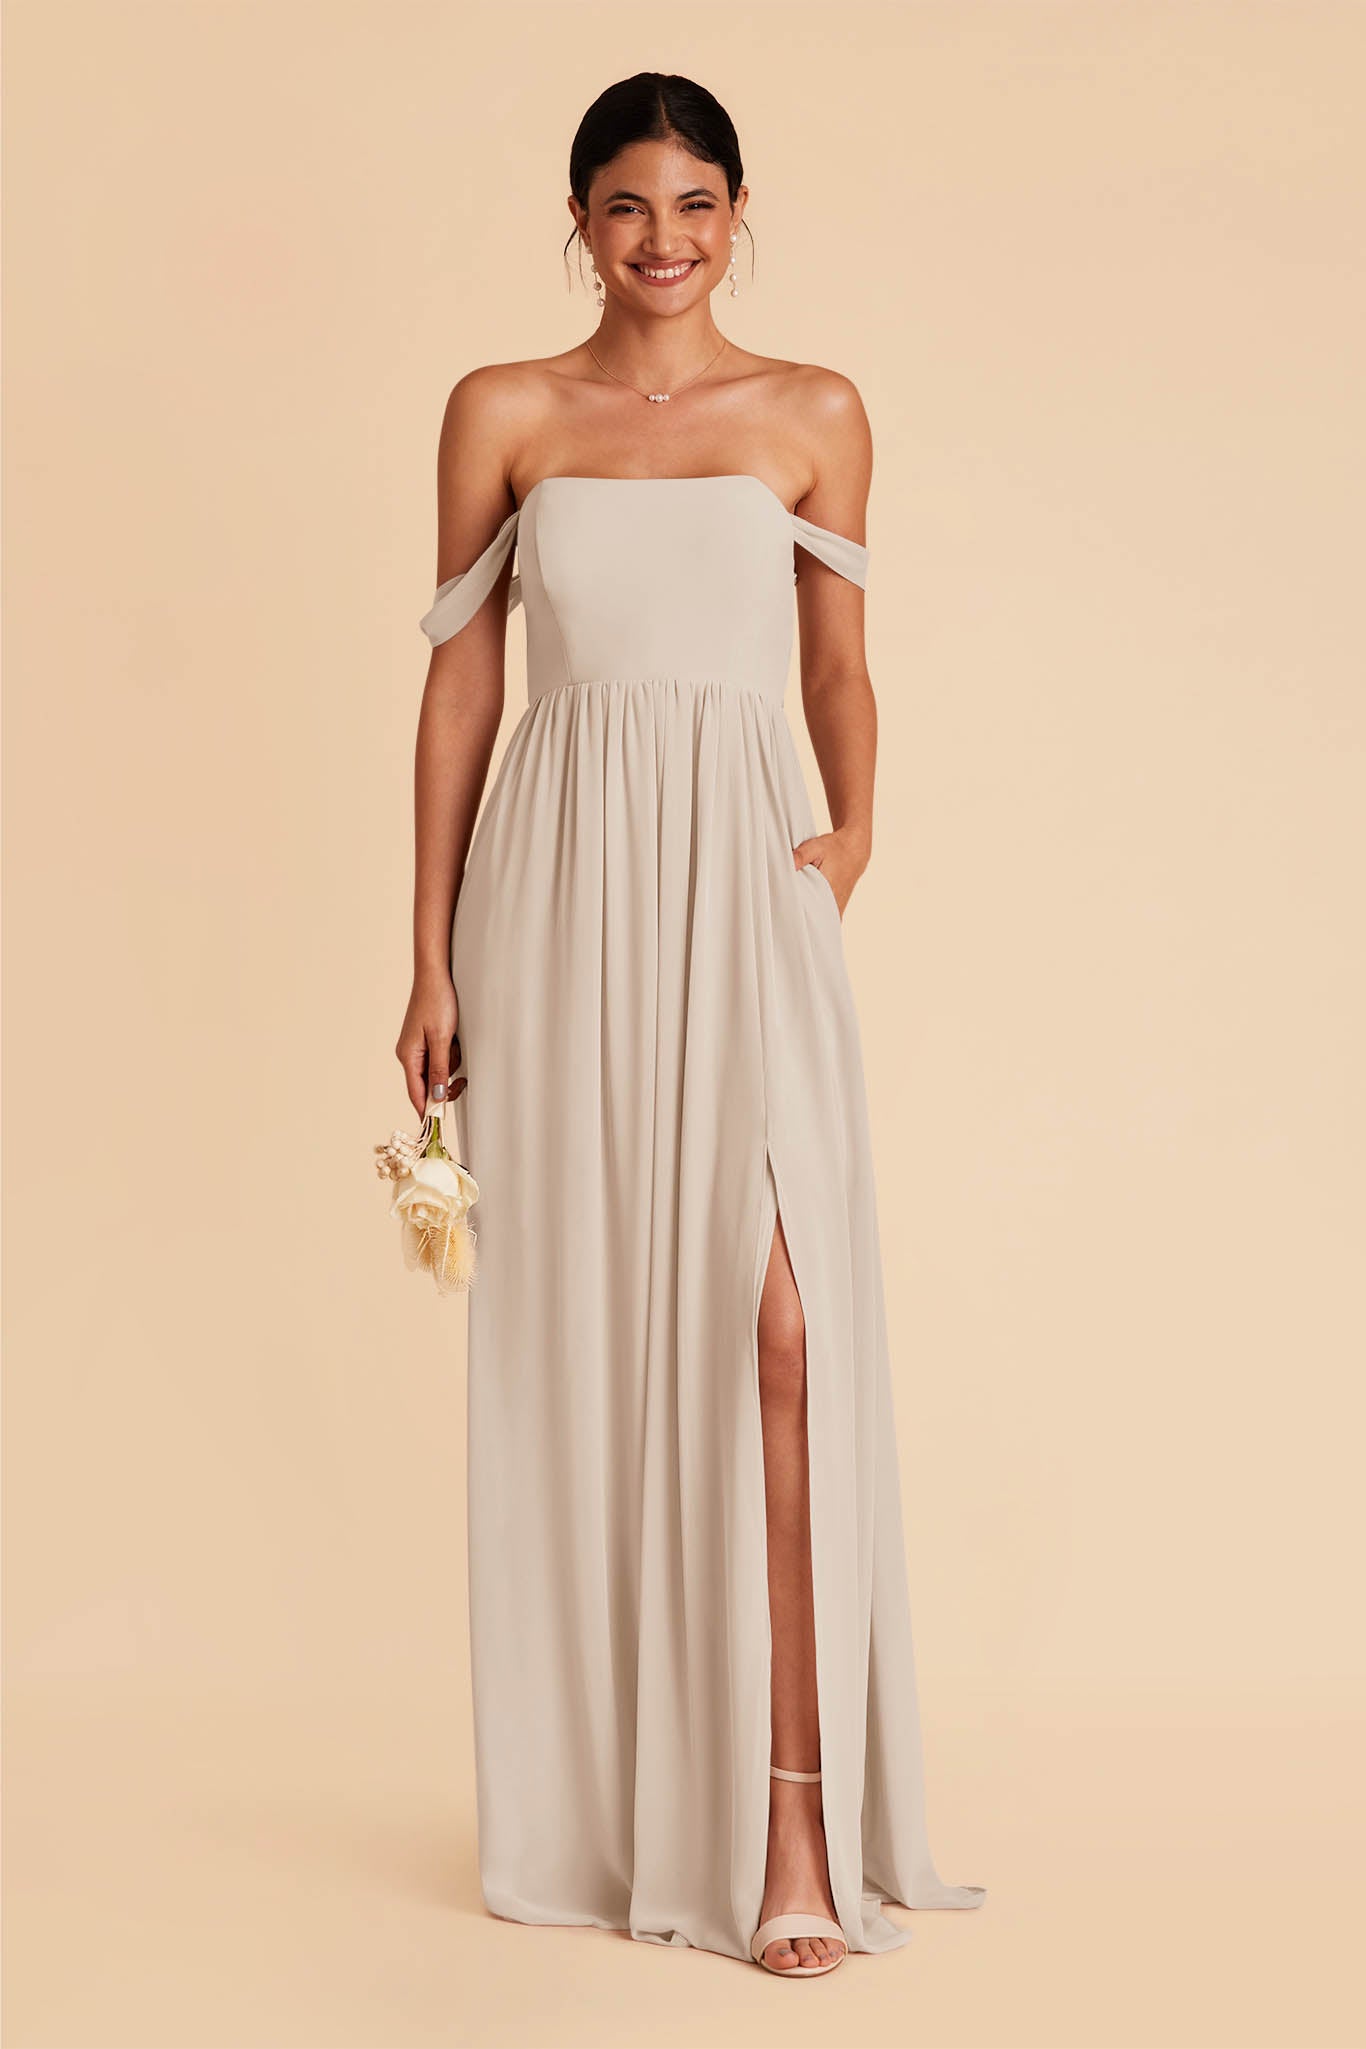 Neutral Champagne August Convertible Dress by Birdy Grey